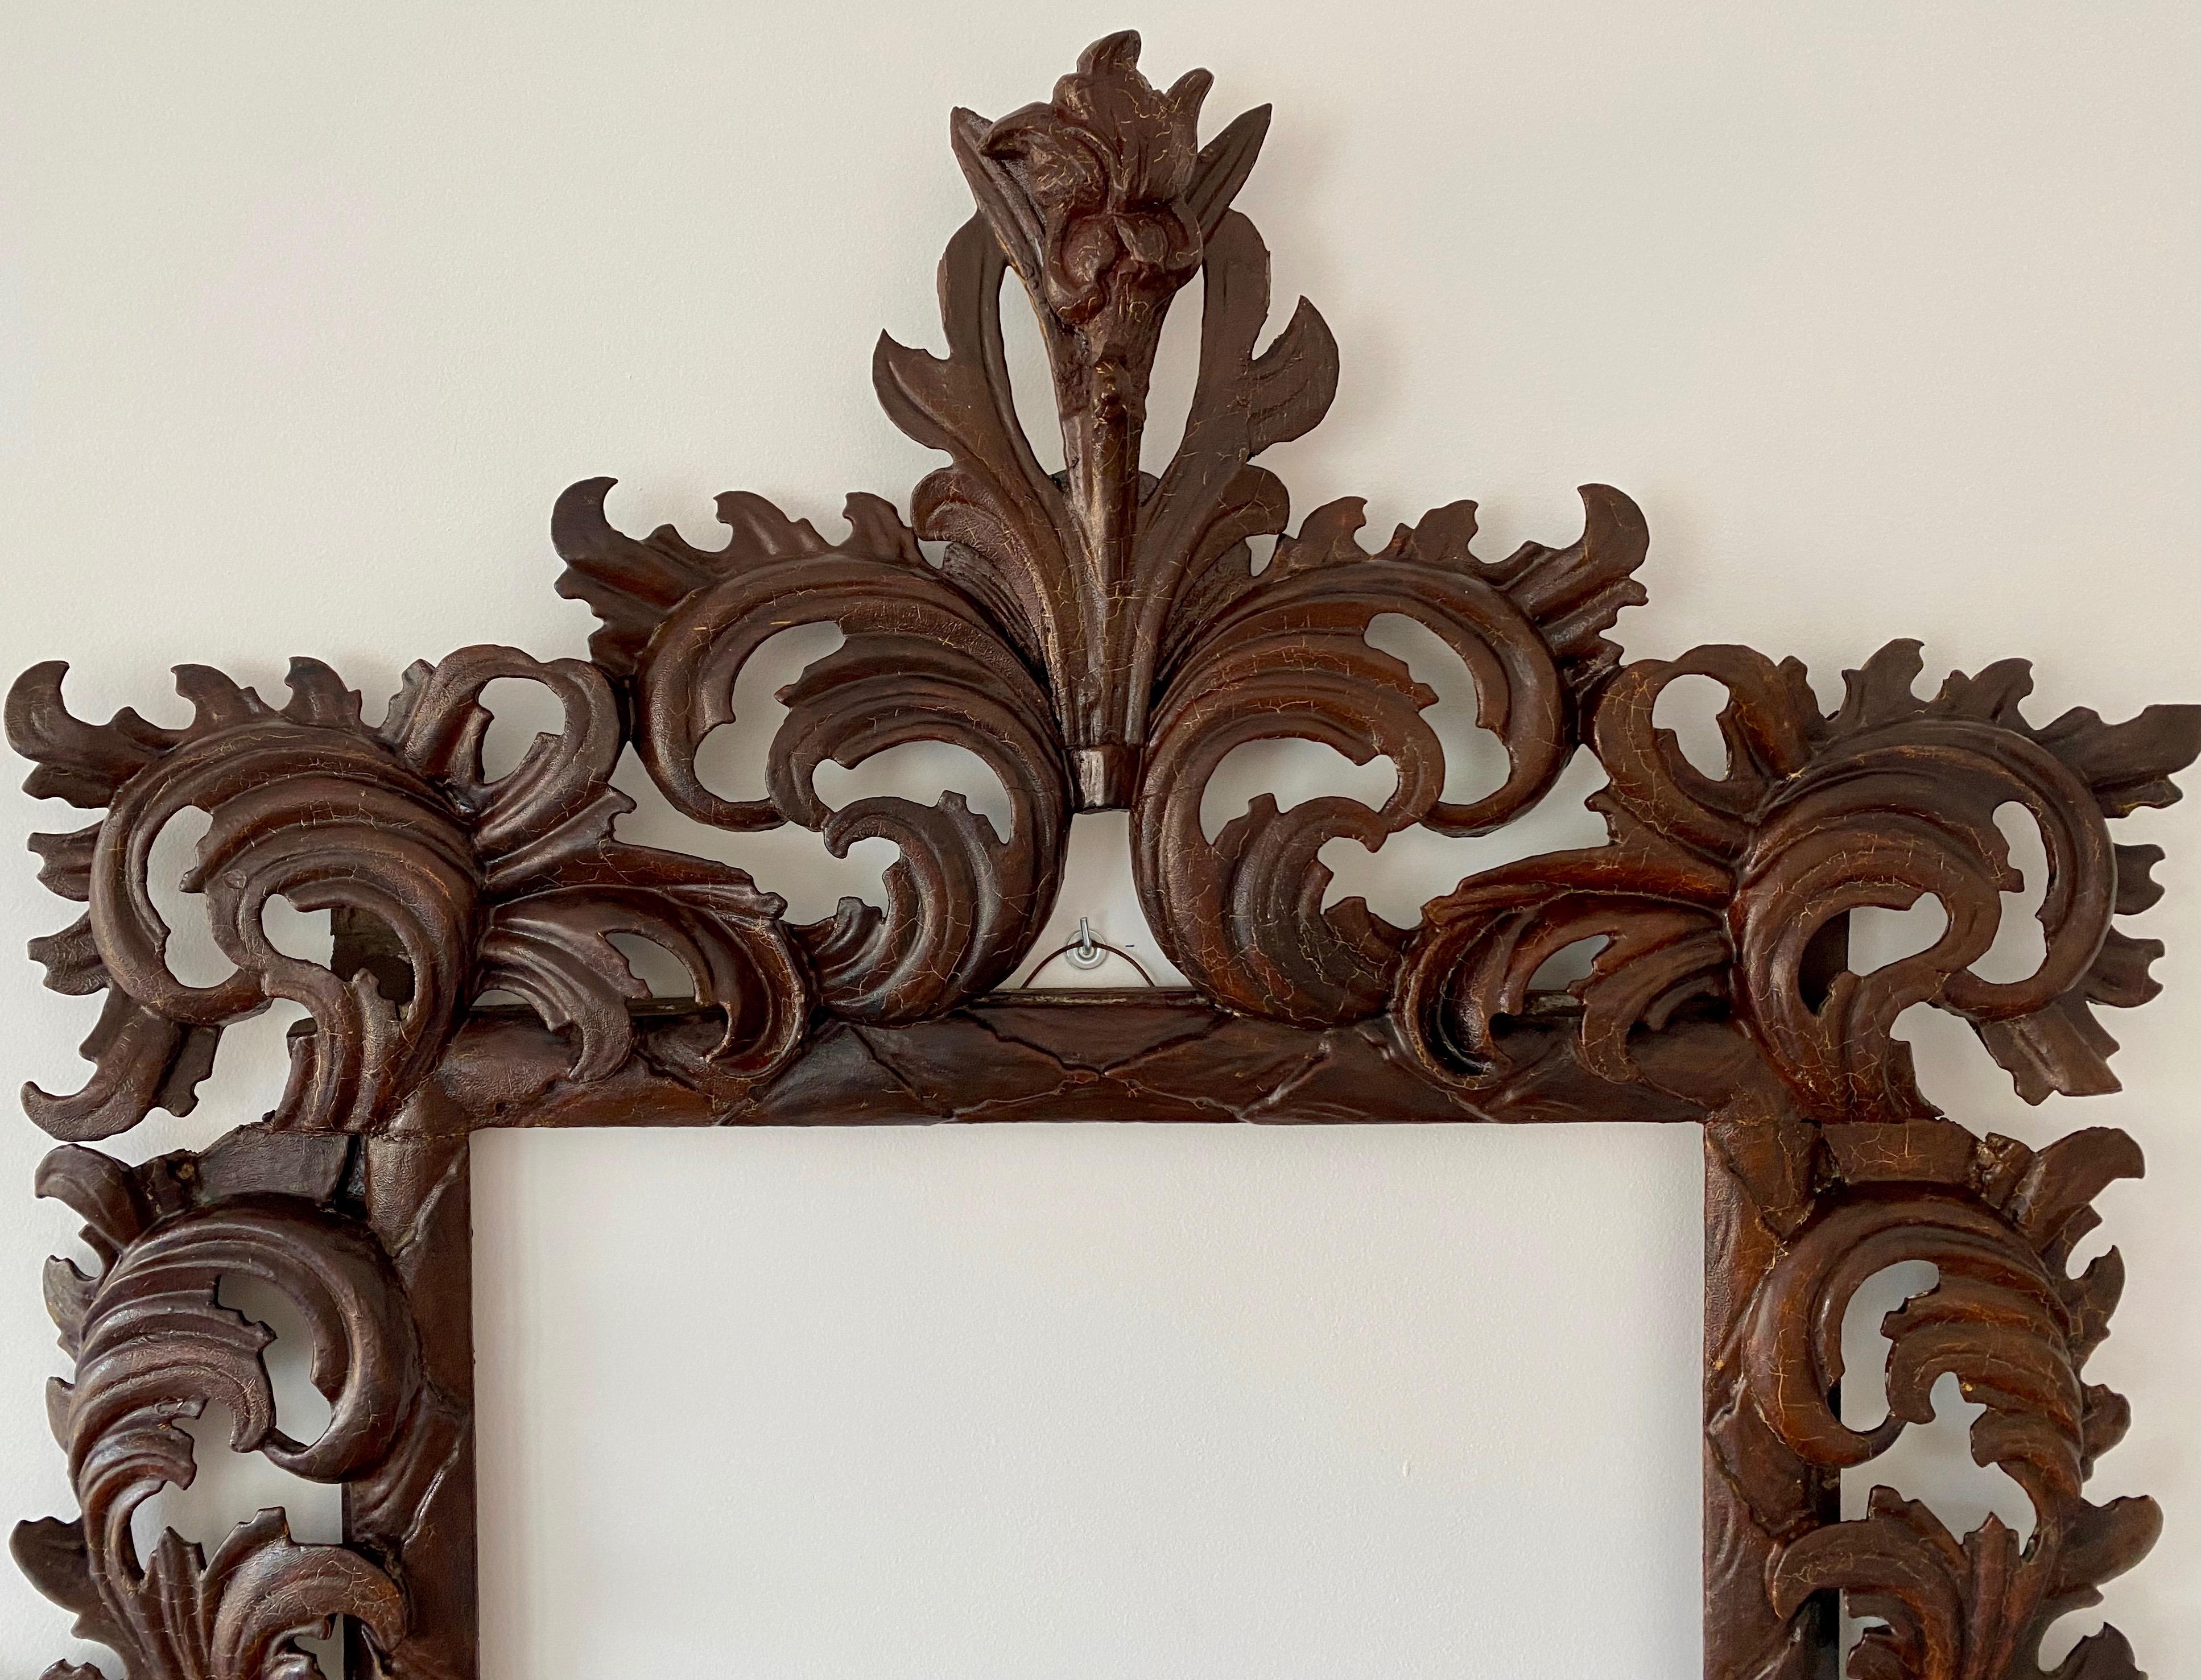 Italian carved and Lacquered picture frame, Circa 1700

This Italian frame was most likely made in Emilia Romagna and more specifically in the town of Modena around the year 1700. Decorated with a flower on the top center and leaves motif around the